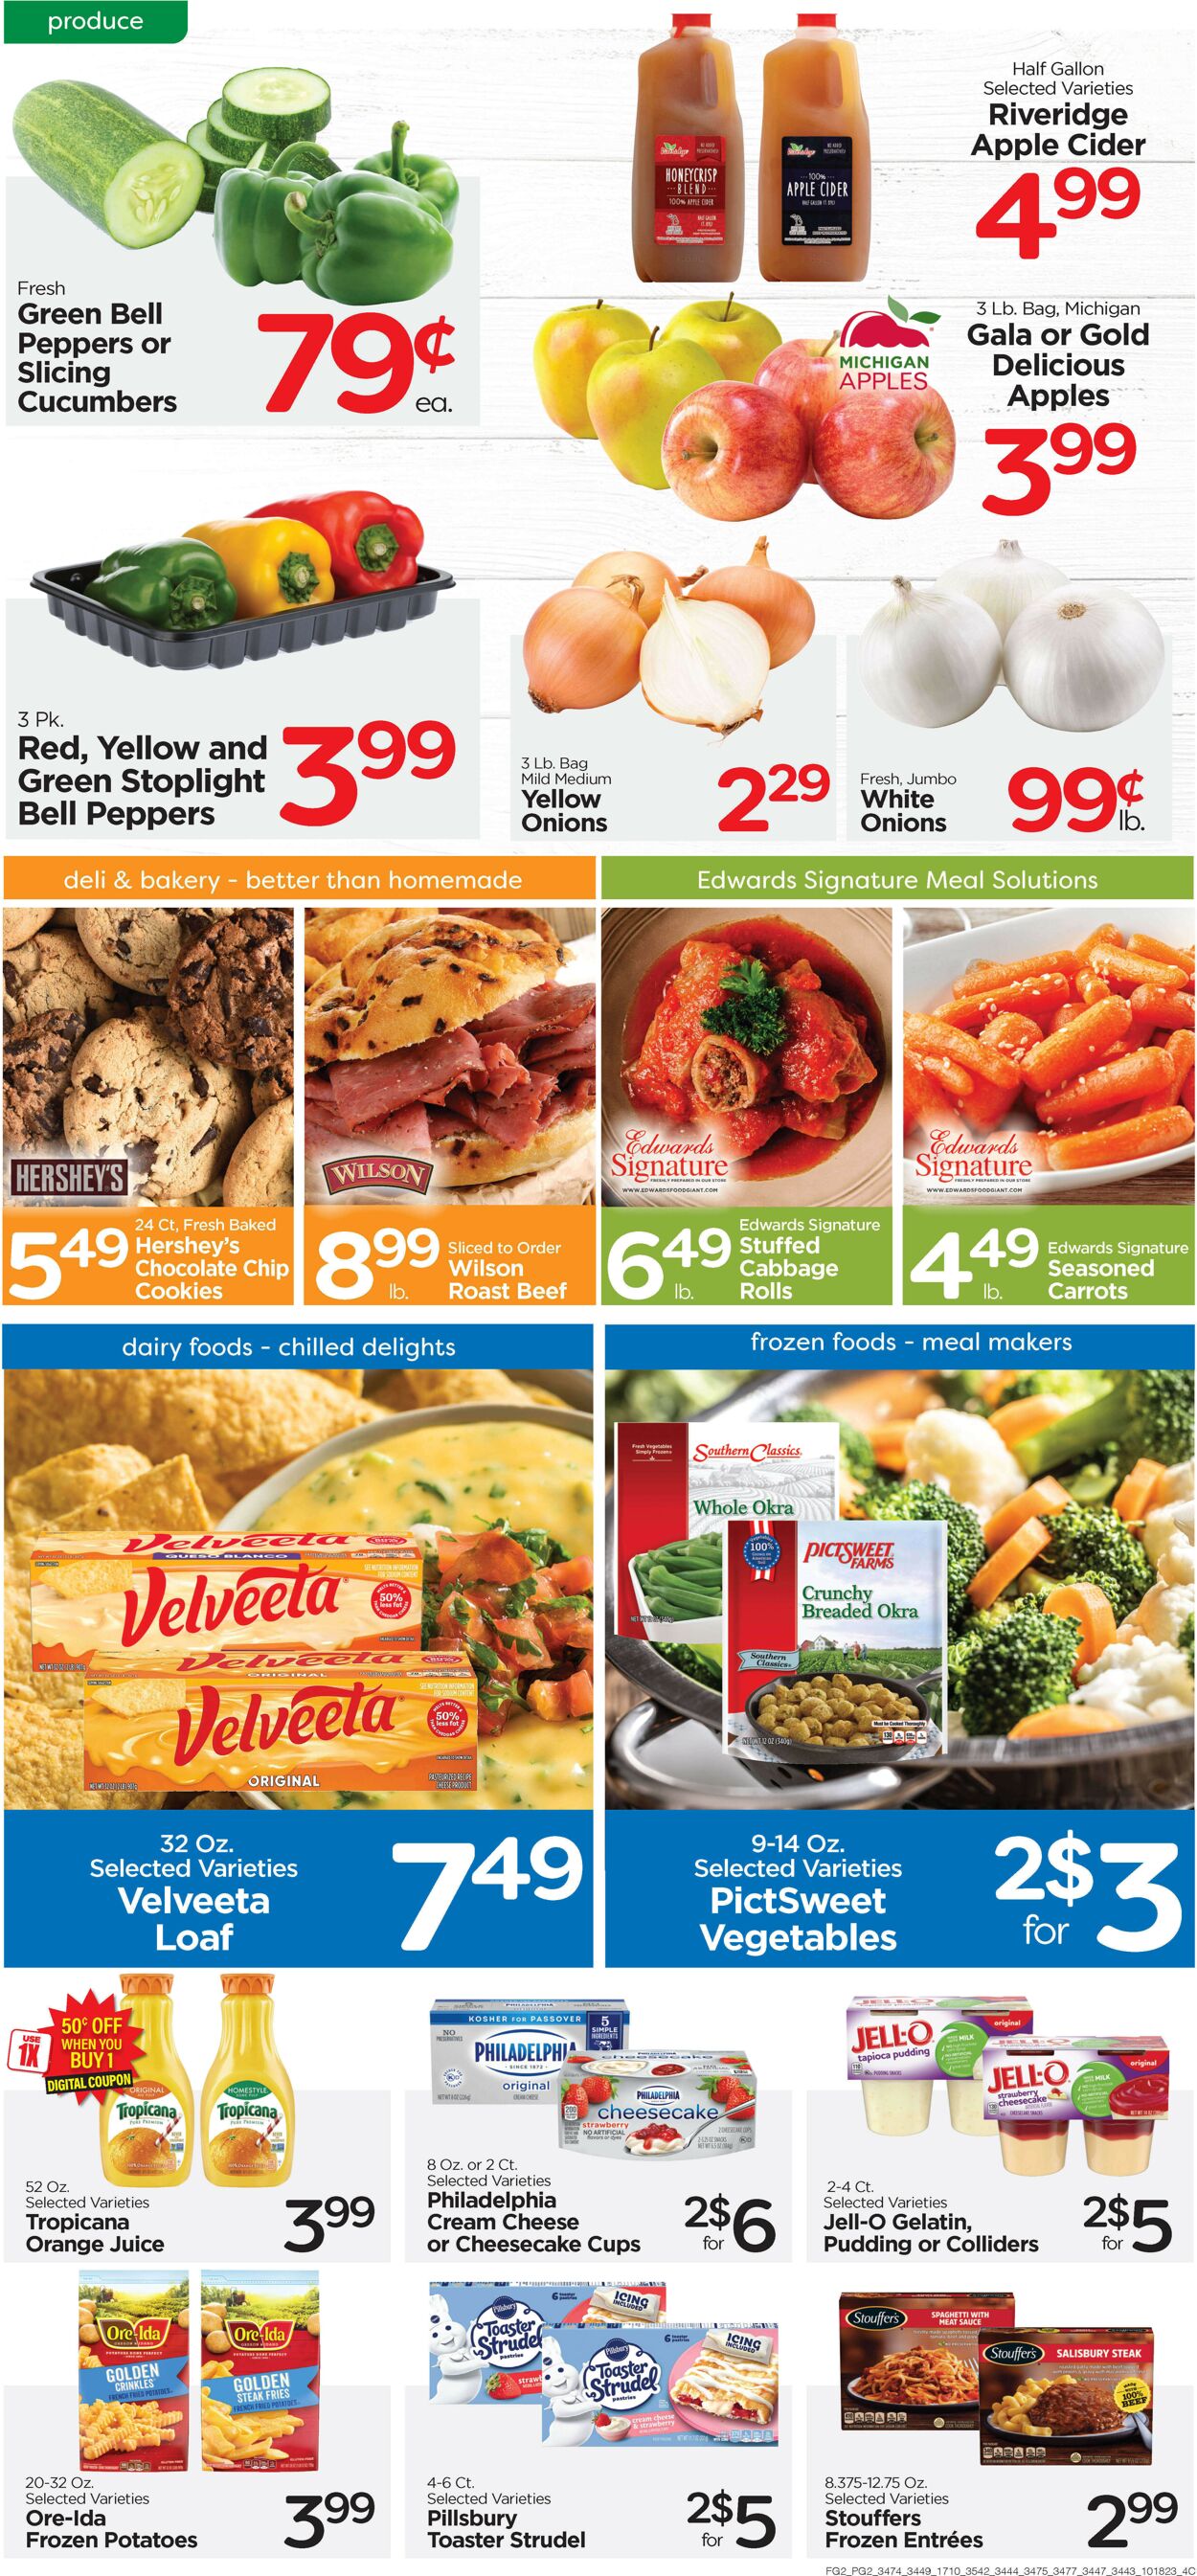 Catalogue Edwards Food Giant from 10/18/2023